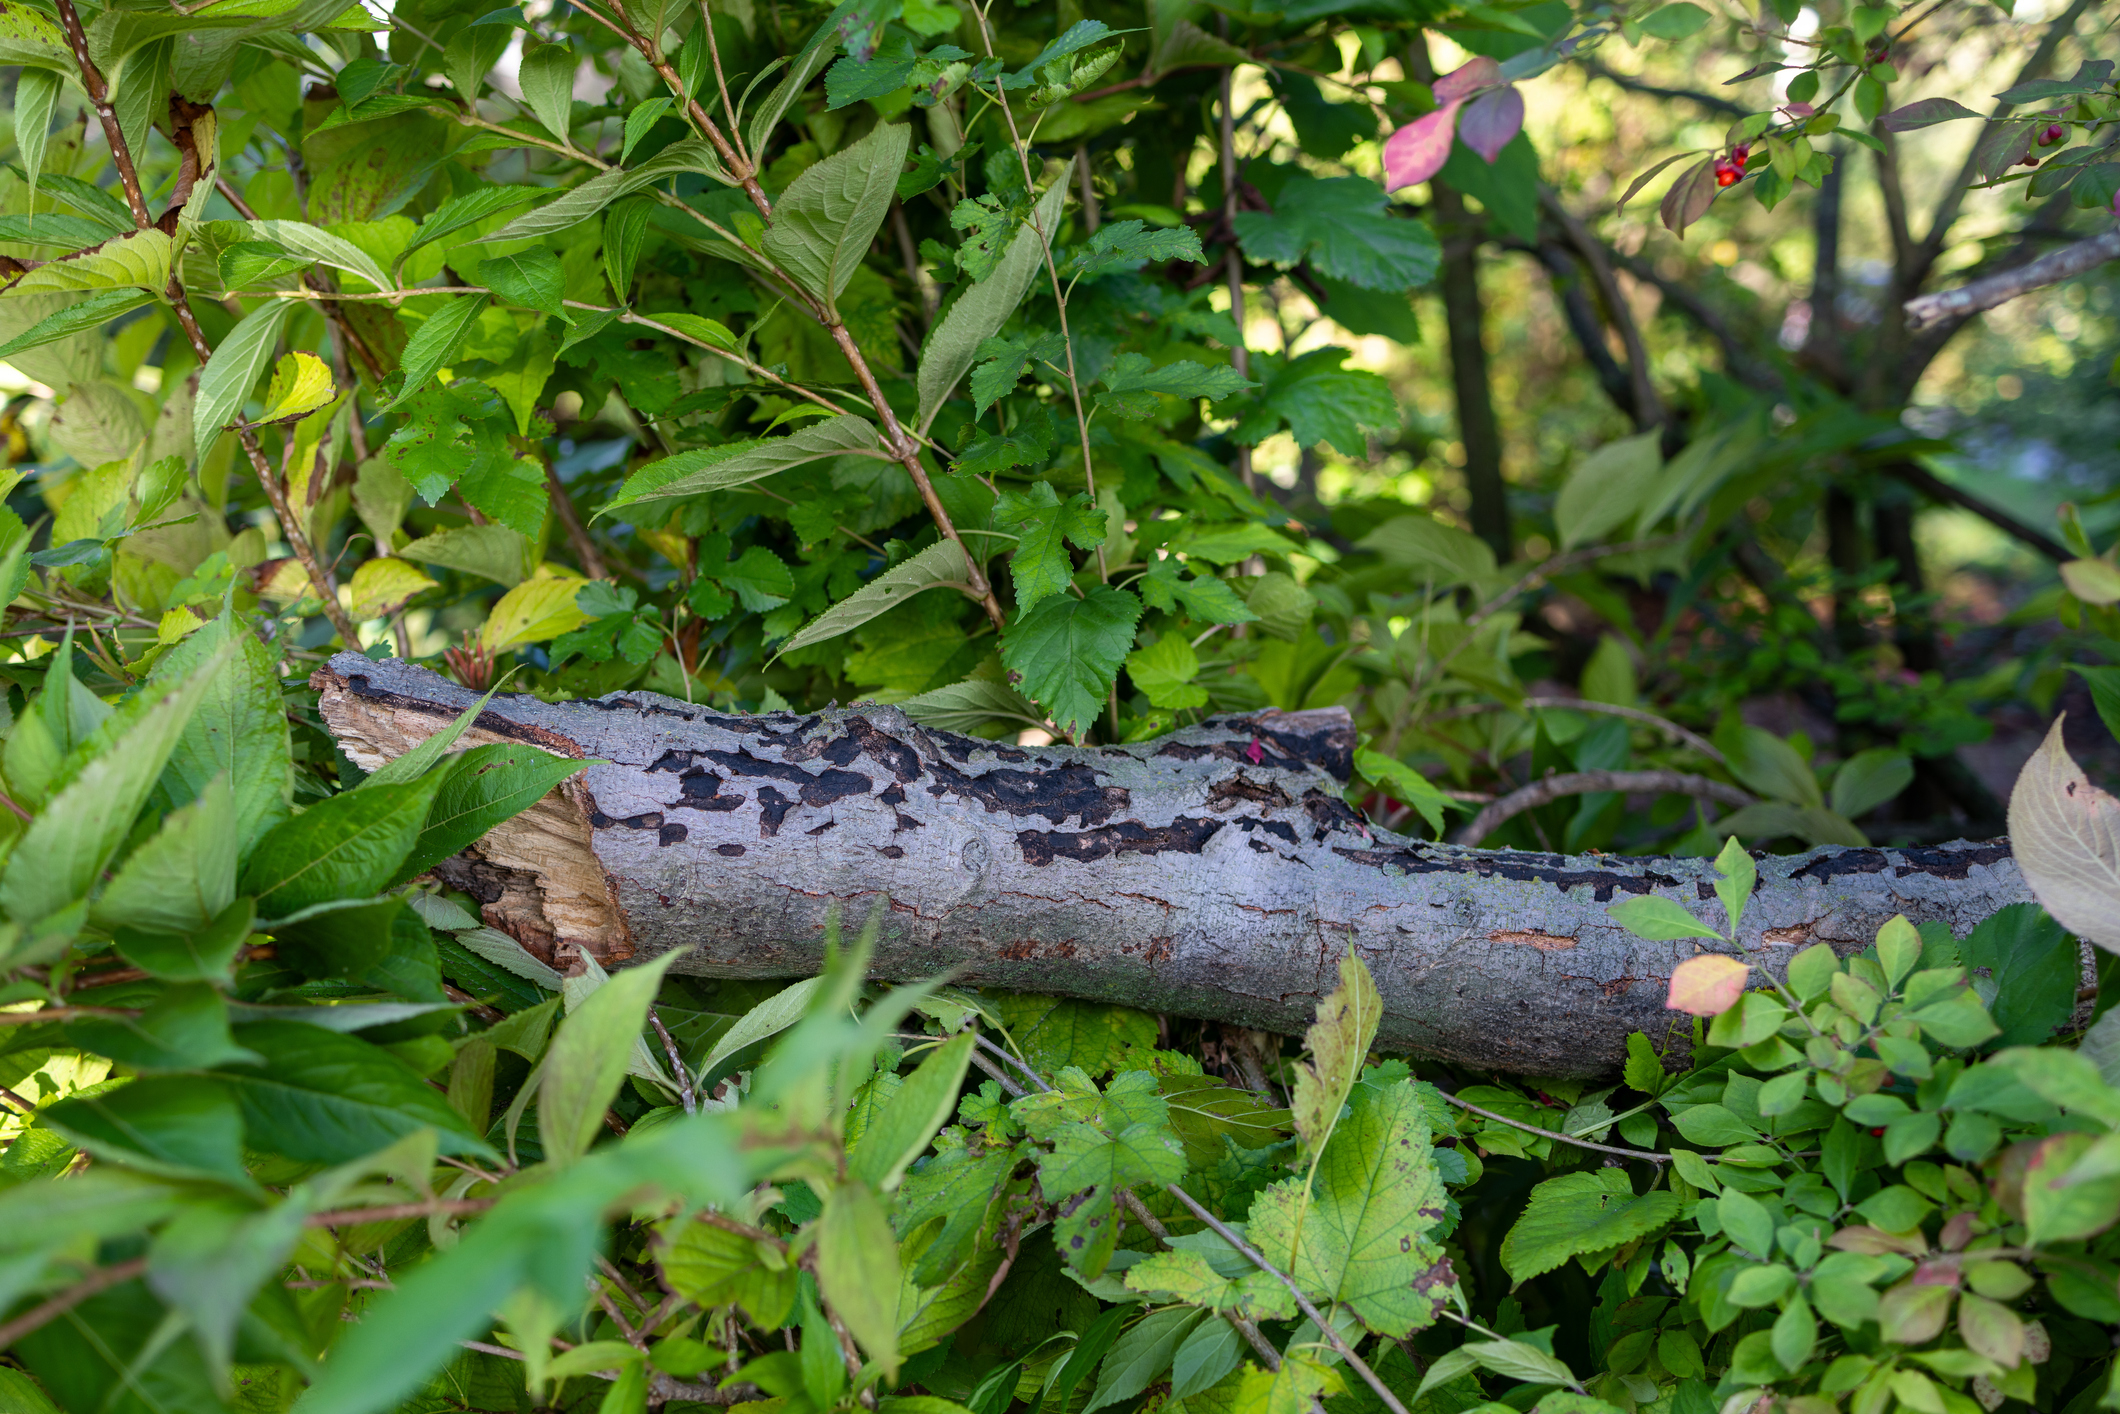 A fallen tree branch lies among dense green foliage in a forest setting